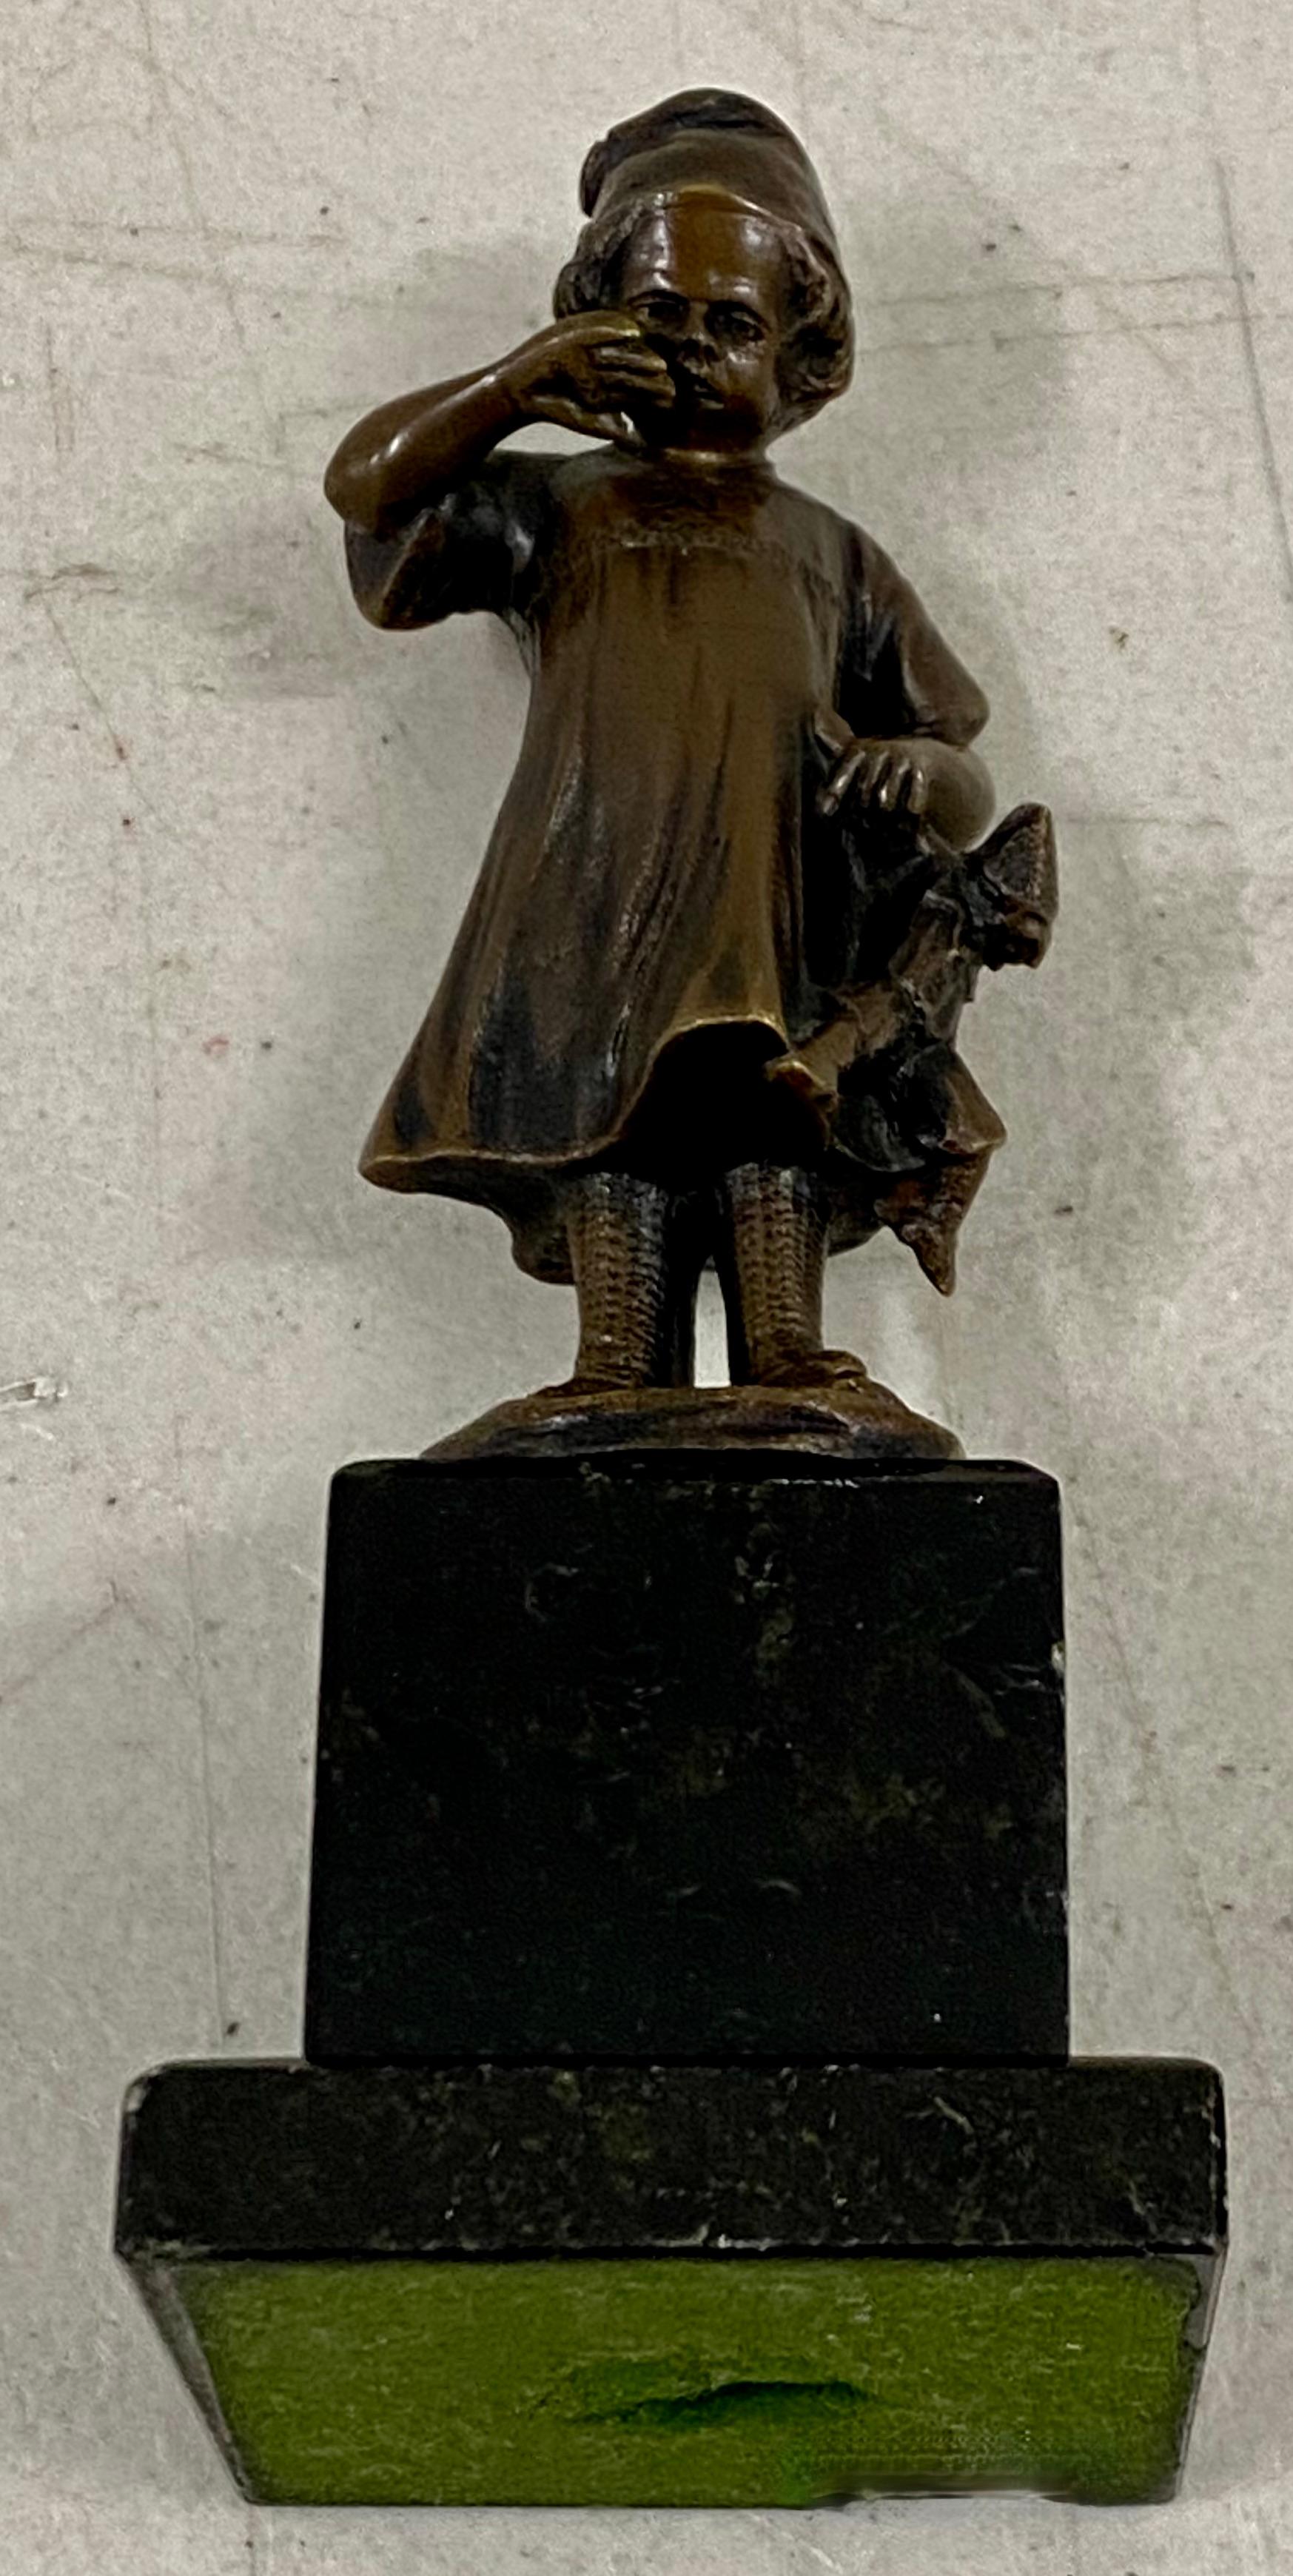 19th Century Miniature Bronze Sculpture of a Young Girl Holding a Doll

Charming bronze atop a marble base

The overall dimensions are 2